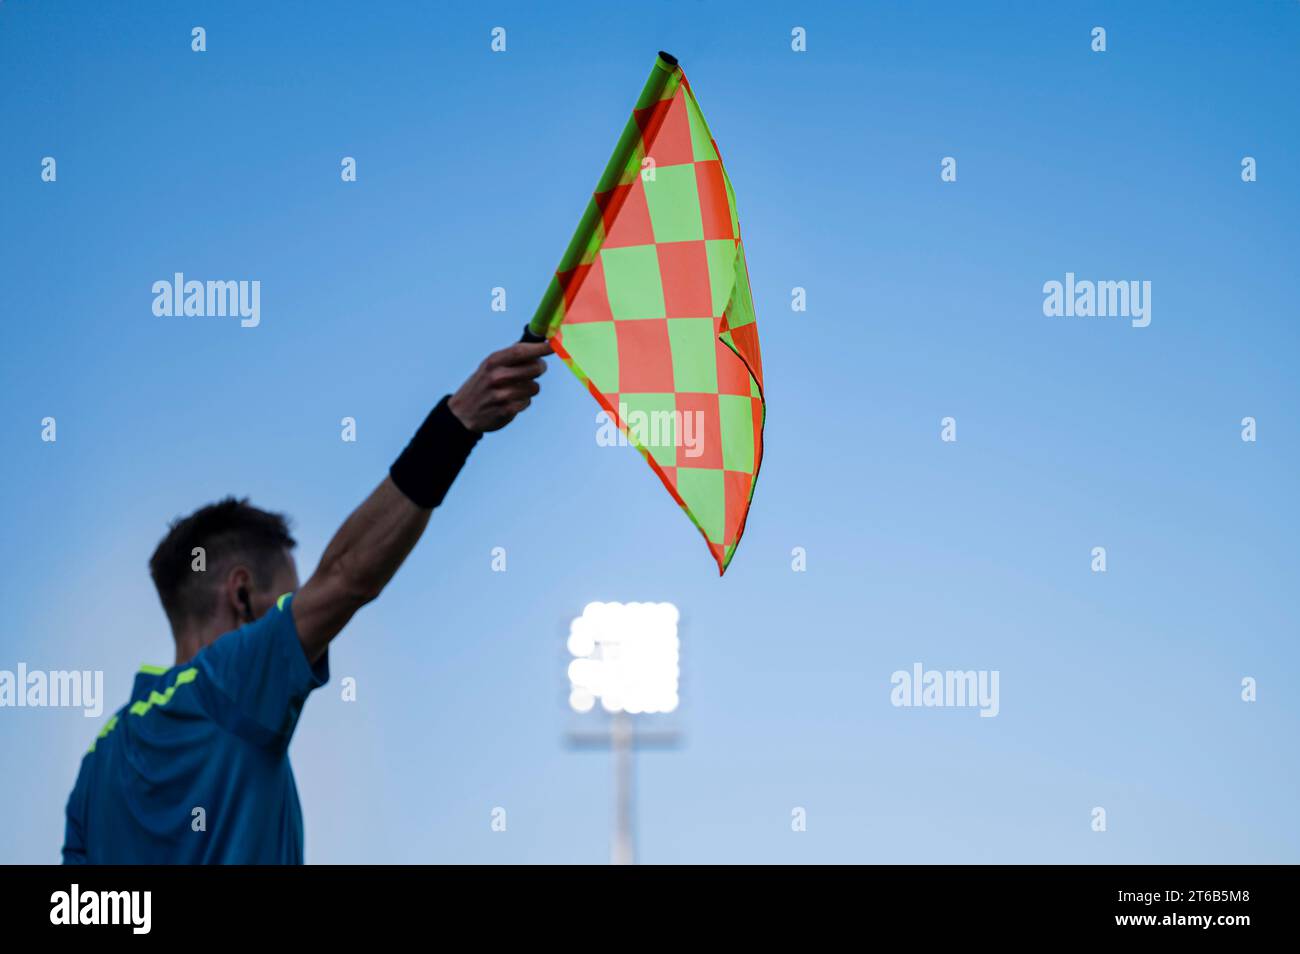 Raised flag of the sideline referee during football match, blue sky and lamps in the background. Stock Photo